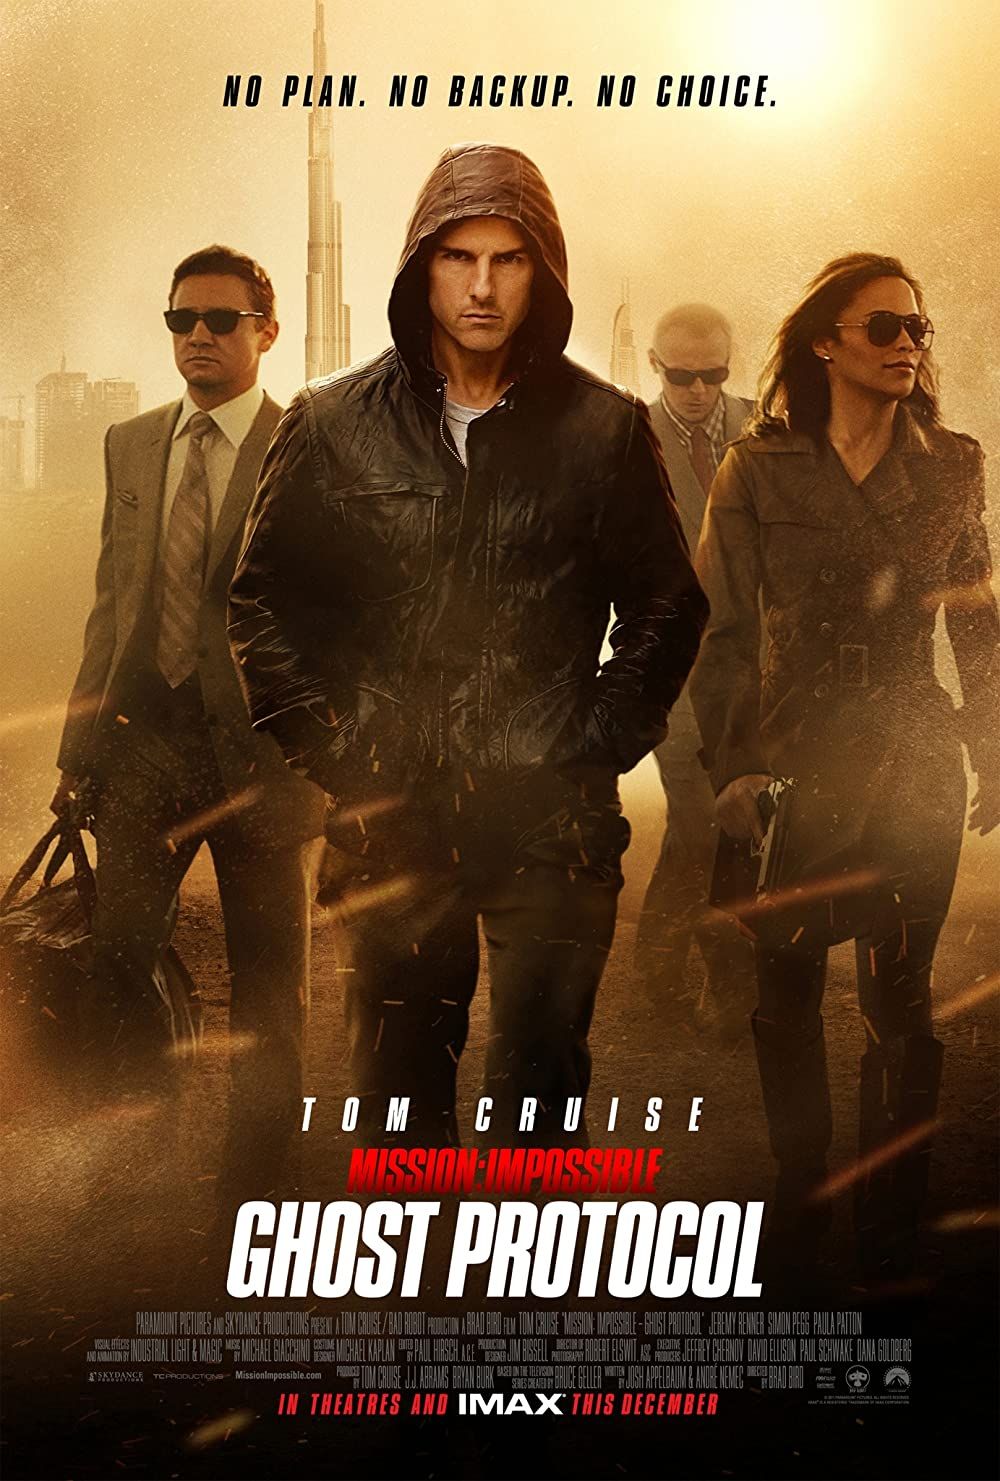 Mission Impossible Ghost Protocol movie poster